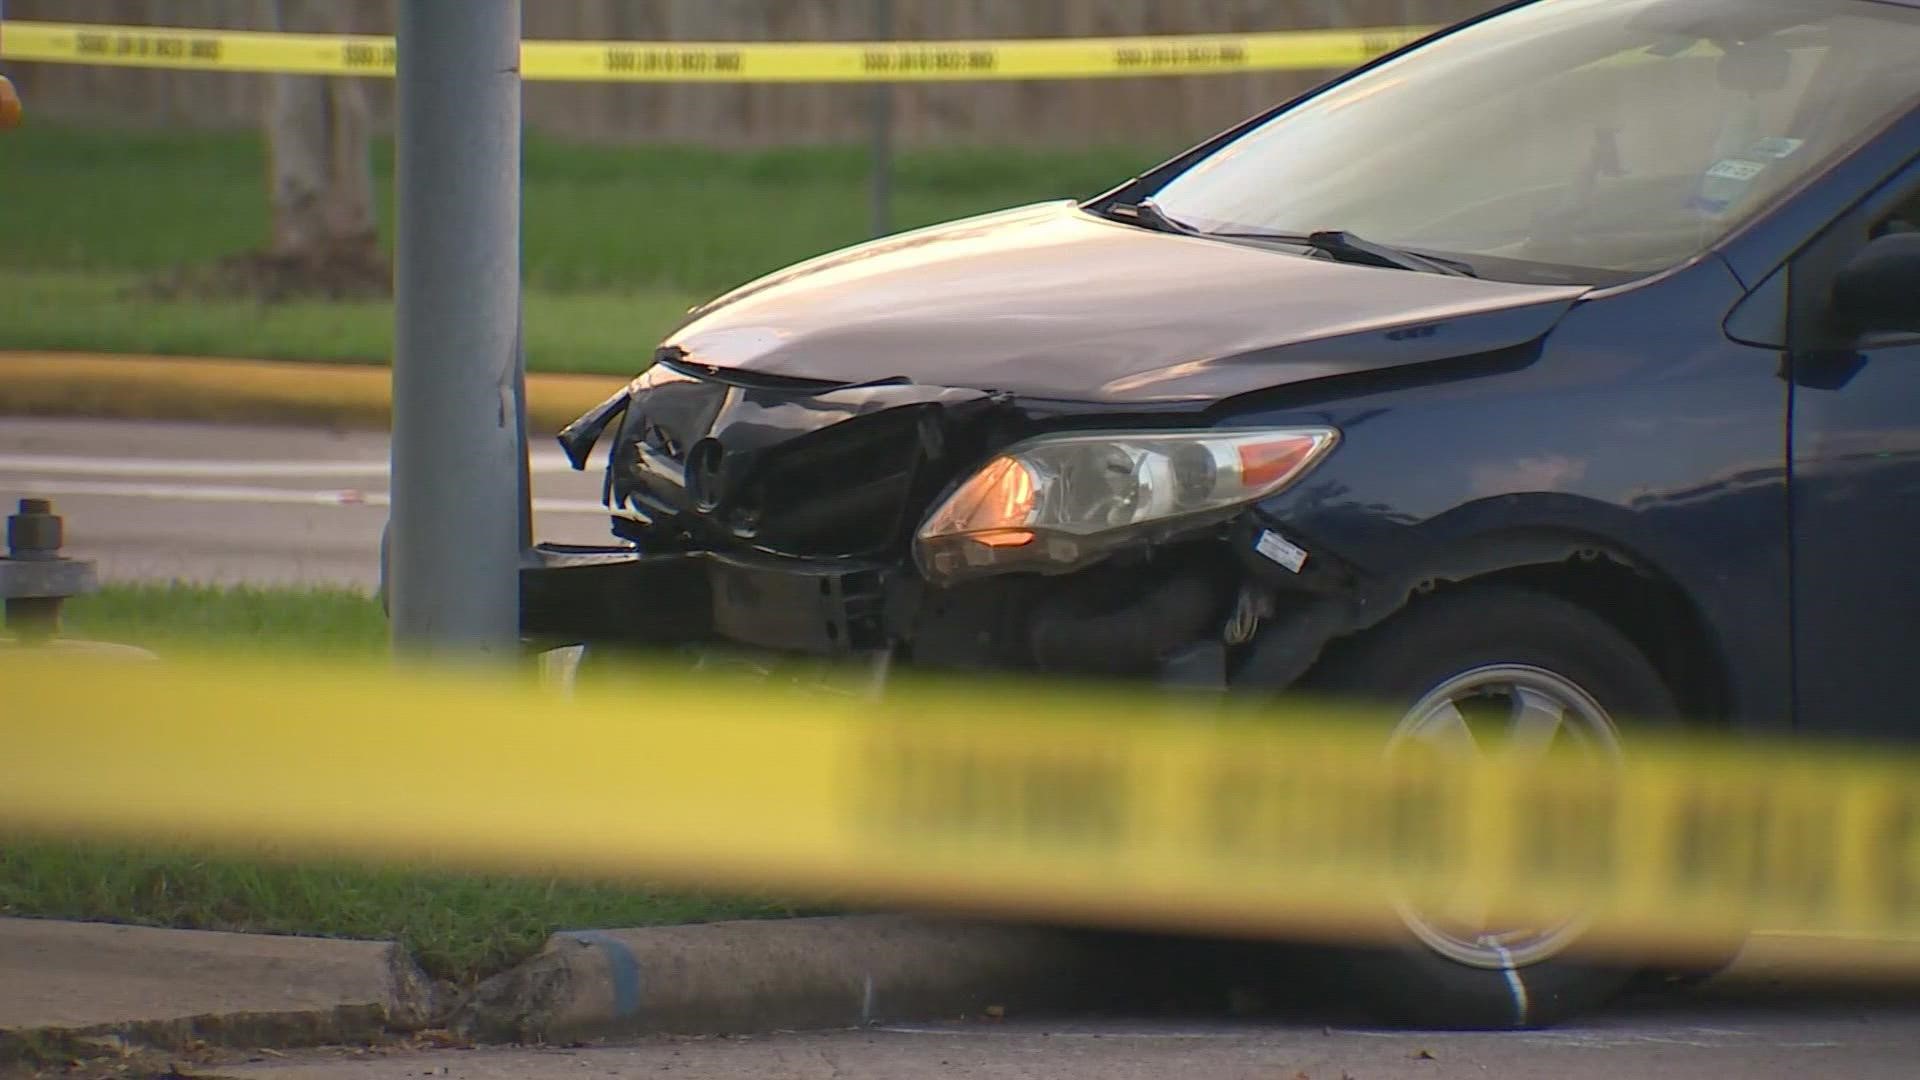 Fort Bend County deputies are looking for a suspect who crashed into a vehicle then shot the driver of that vehicle.